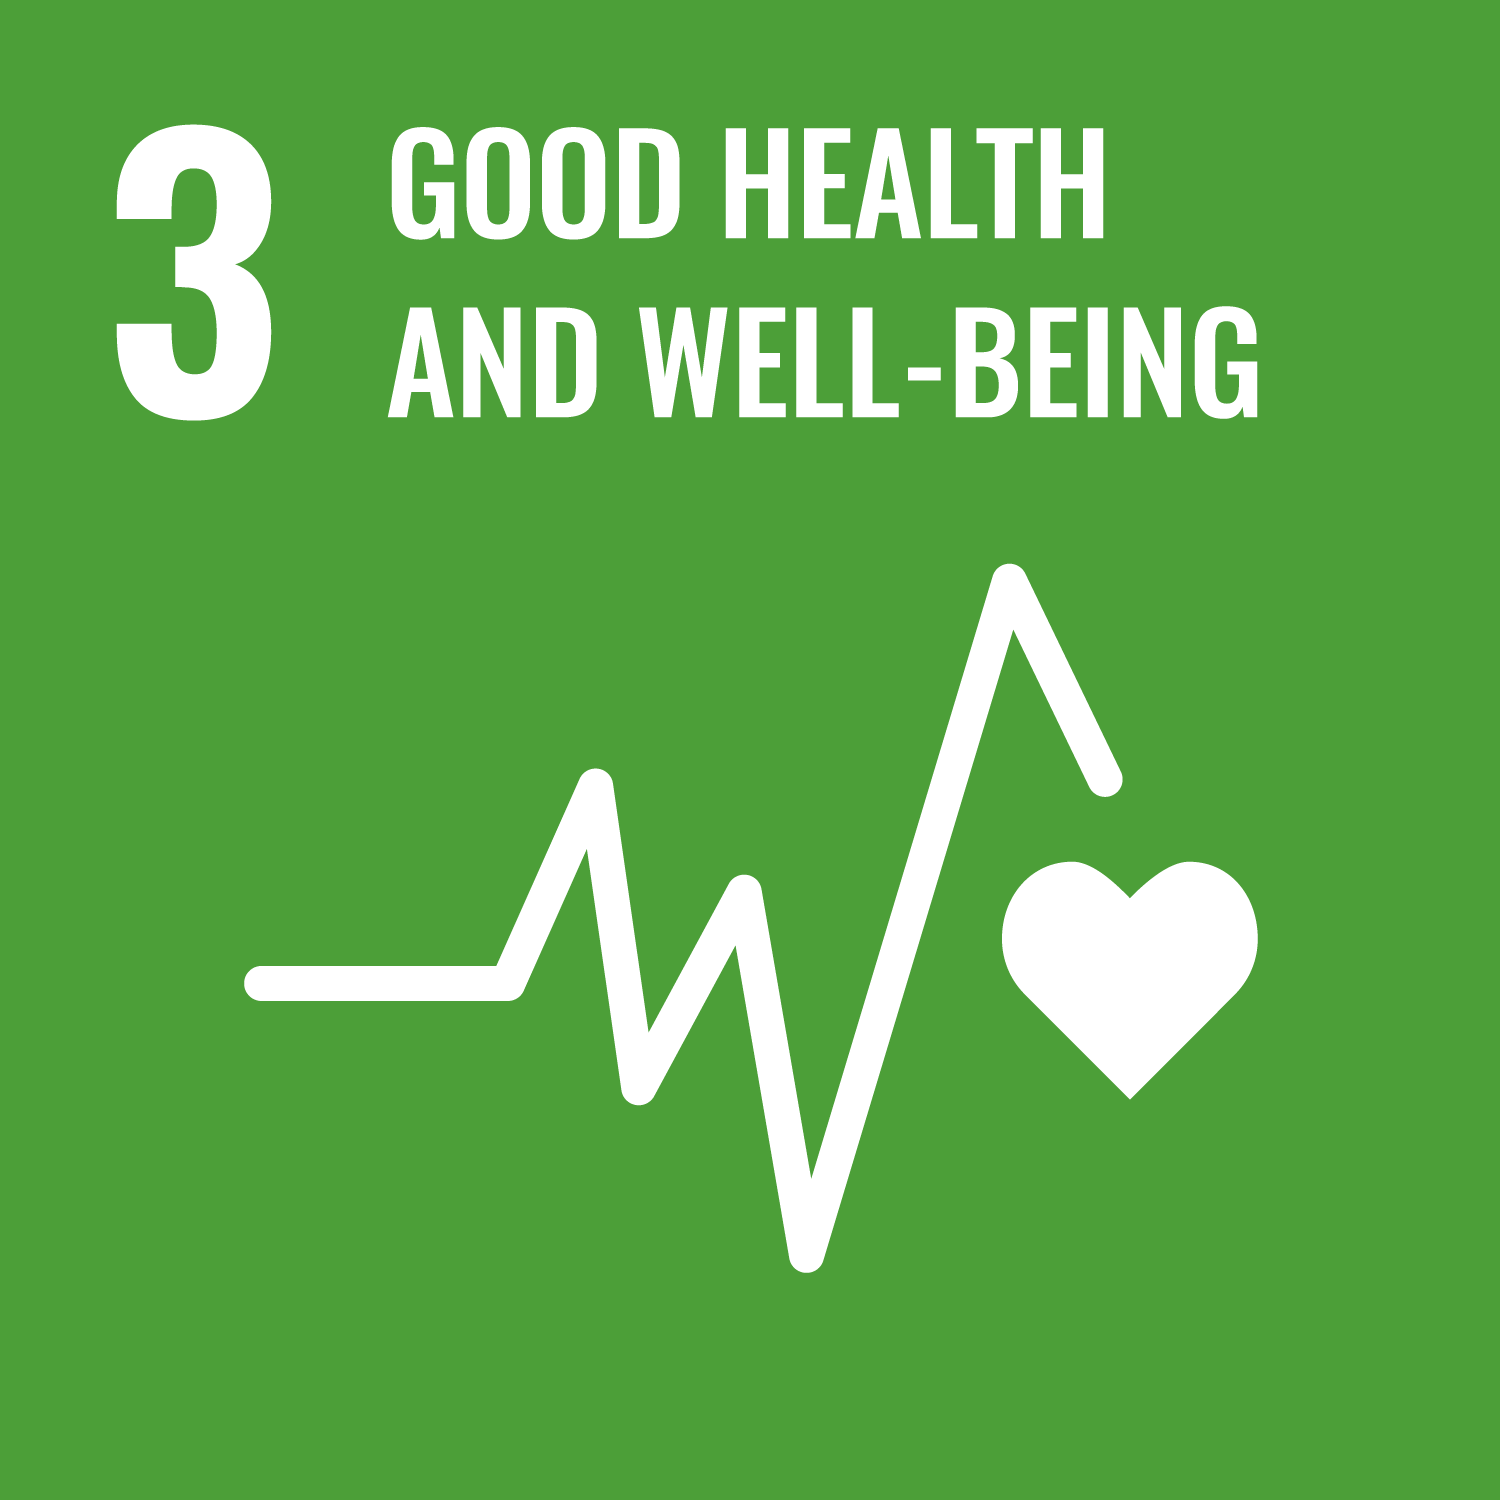 SDG 3 Good Health and Well-Being Graphic